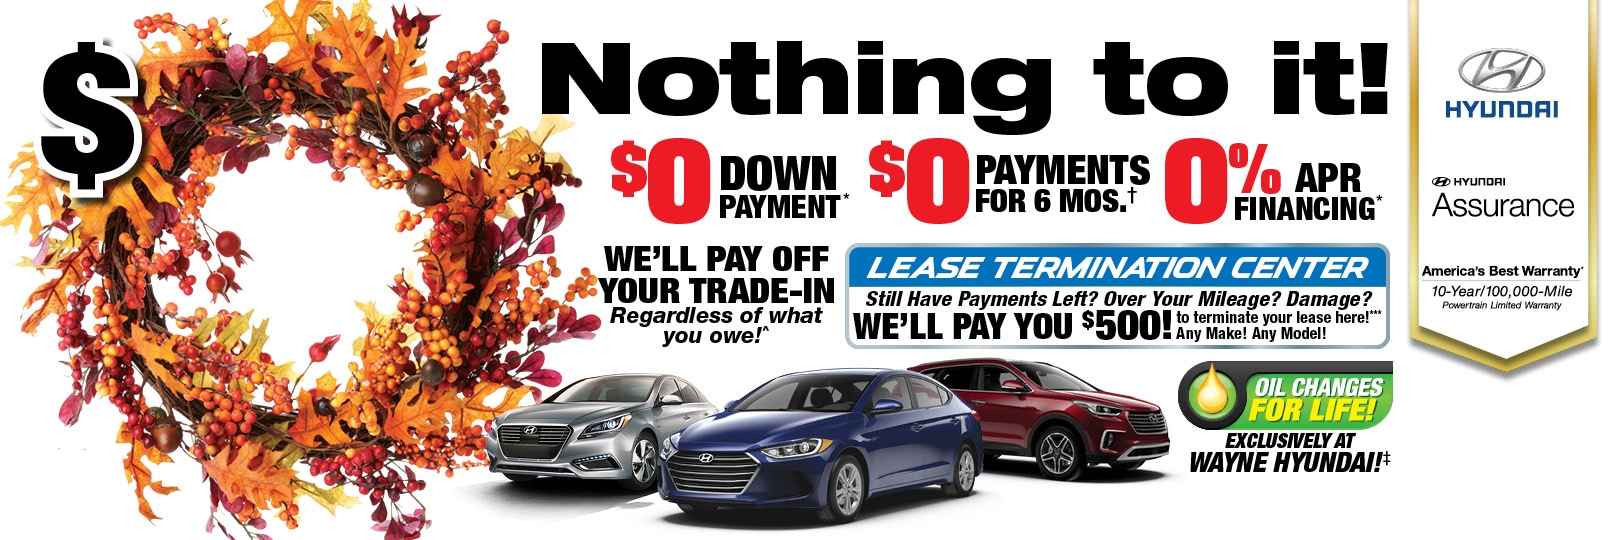 Hyundai Genesis Lease Finance Specials For New Jersey